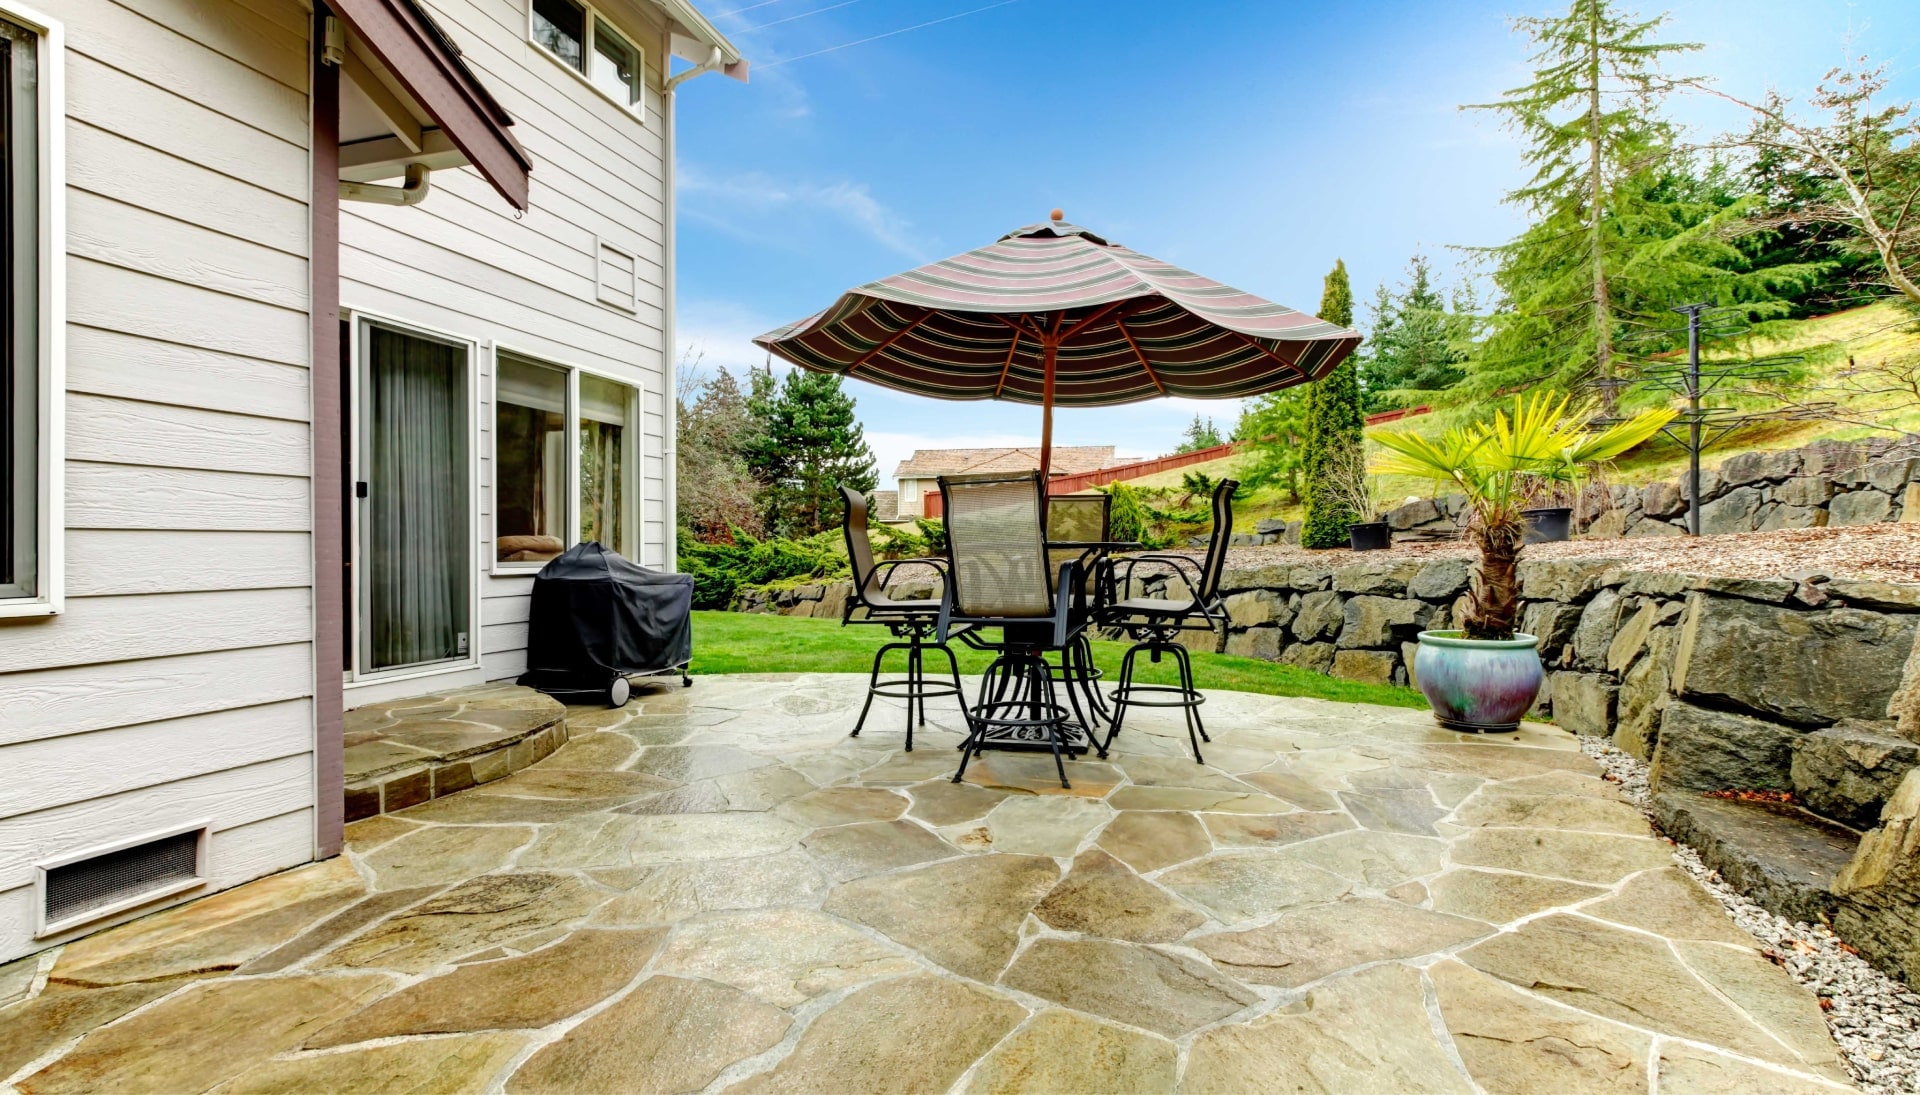 Beautifully Textured and Patterned Concrete Patios in Olympia, Washington area!